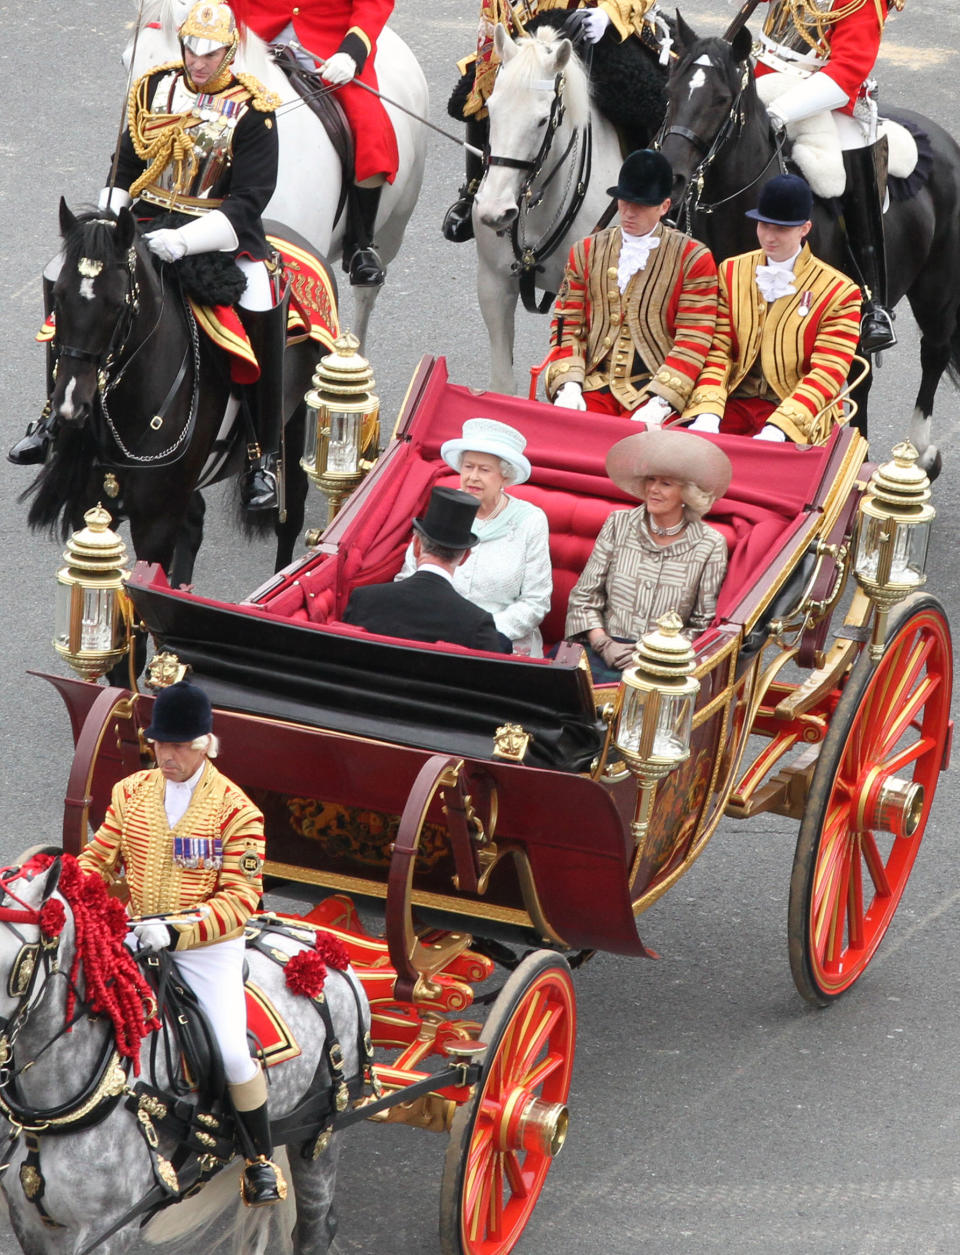 Britain's Queen Elizabeth facing camera left, with Prince Charles and Camilla Duchess of Cornwall, ride in a carriage as they head for Buckingham Palace in a carriage procession in London Tuesday June 5, 2012. The carriage procession is part of a four-day Diamond Jubilee celebration to mark the 60th anniversary of Queen Elizabeth II accession to the throne (AP Photo/Elizabeth Dalziel/Pool)